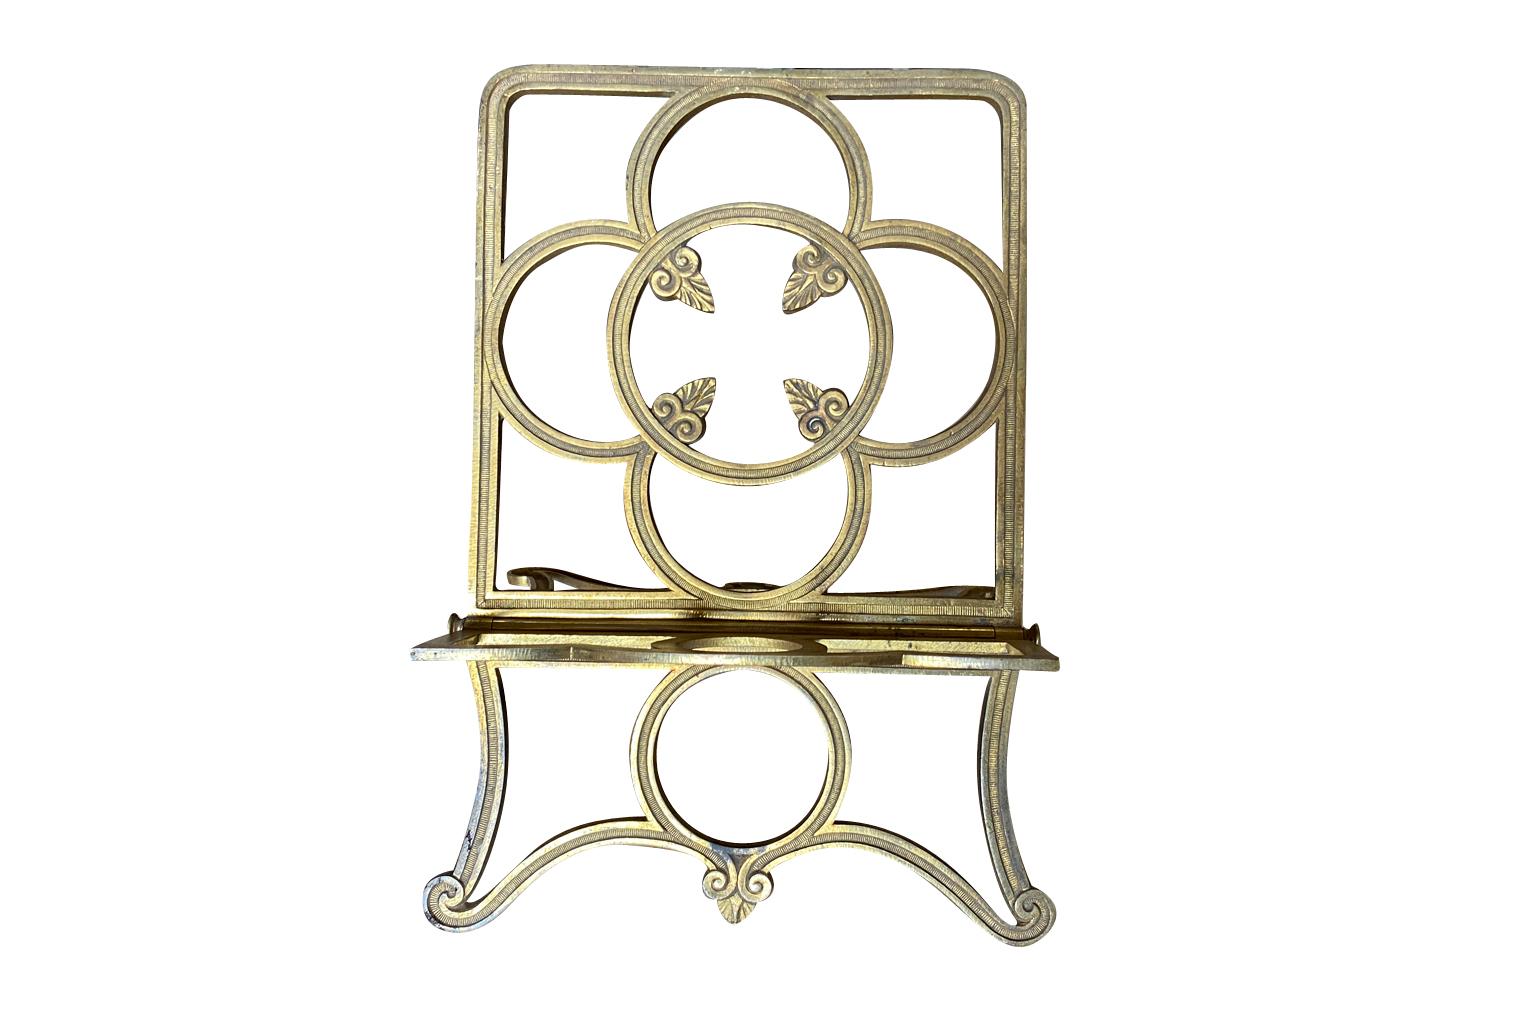 A very charming mid-19th century Porte Livre- Book Stand beautifully crafted in gilt bronze iron.  Perfect not only for the display of a book or a bible, but also for the display of a small painting.